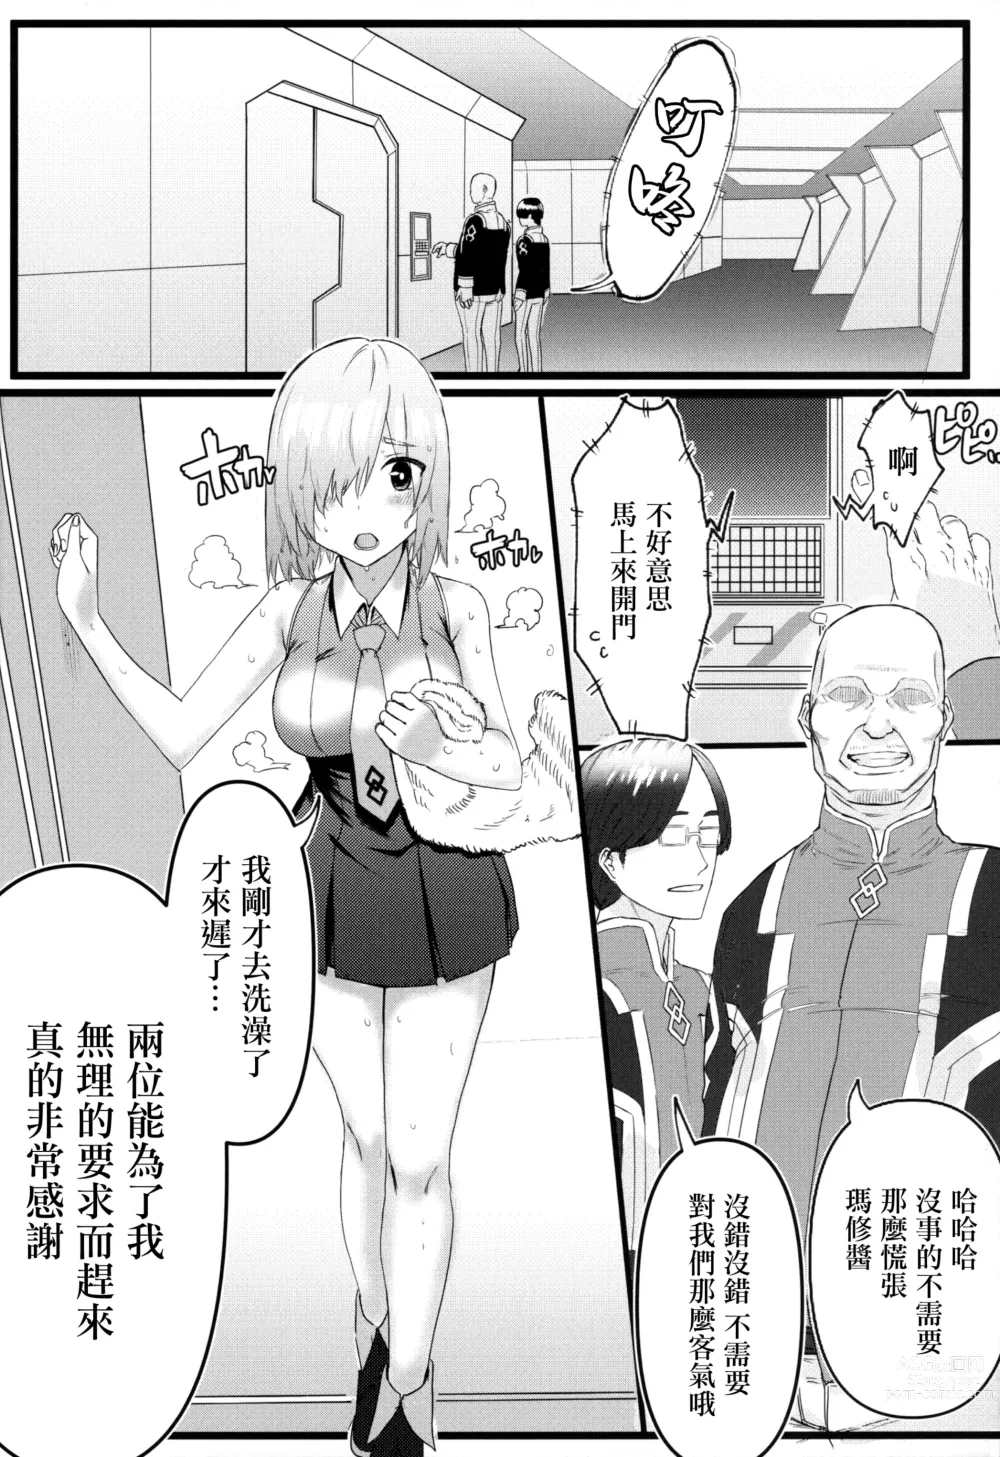 Page 7 of doujinshi 為了前輩NTR瑪修!